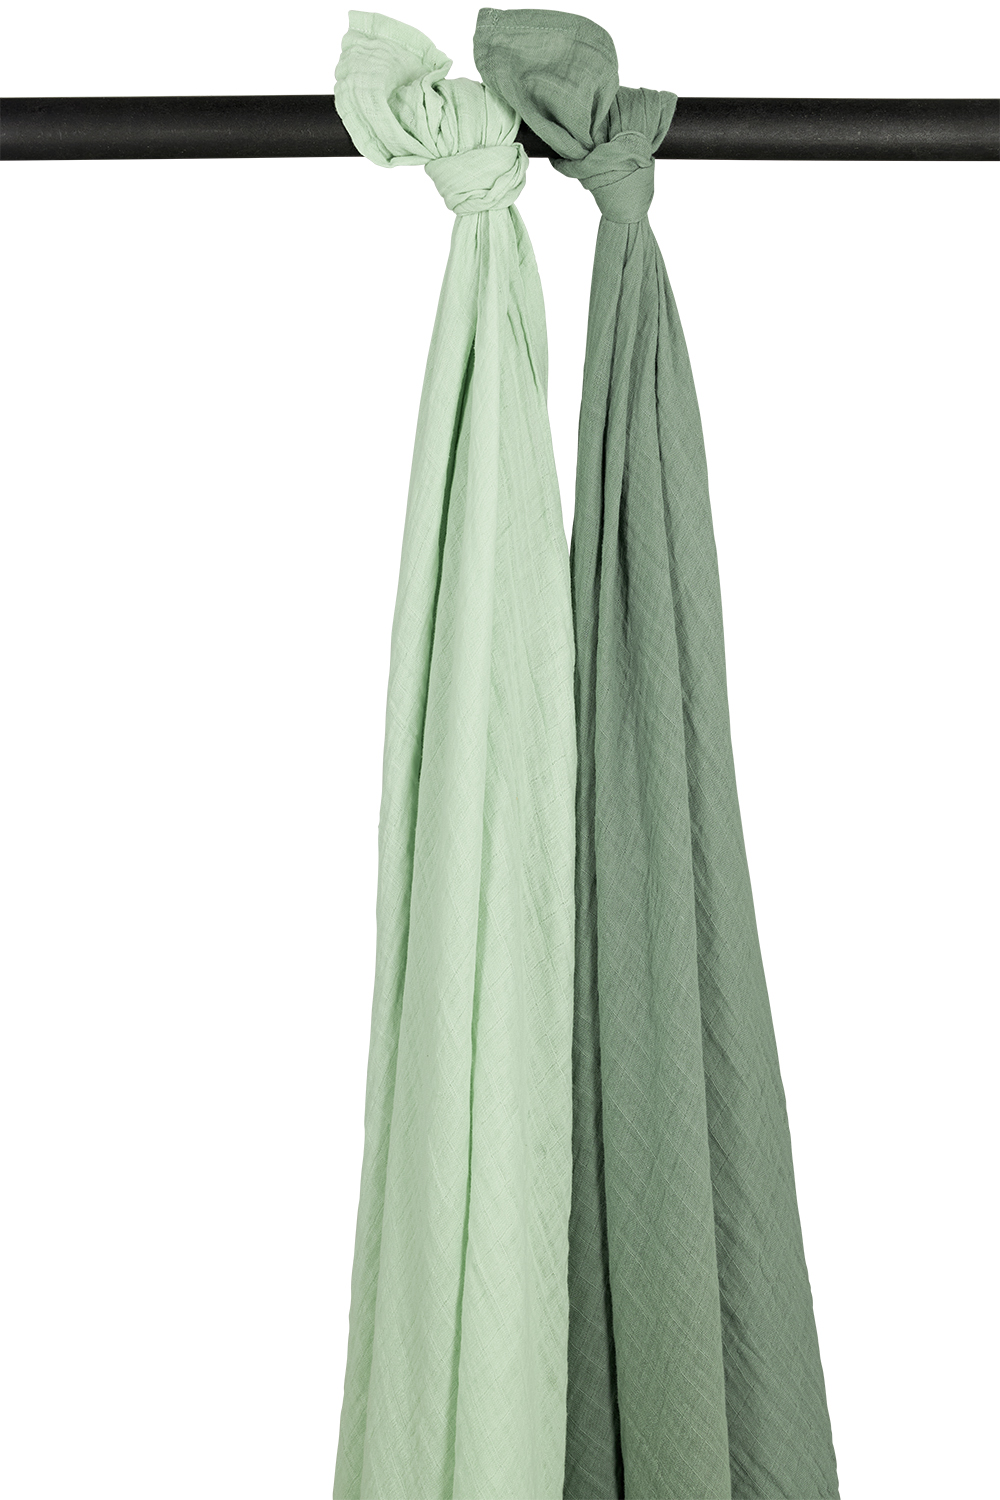 Swaddle  2er pack pre-washed musselin Uni - soft green/forest green - 120x120cm